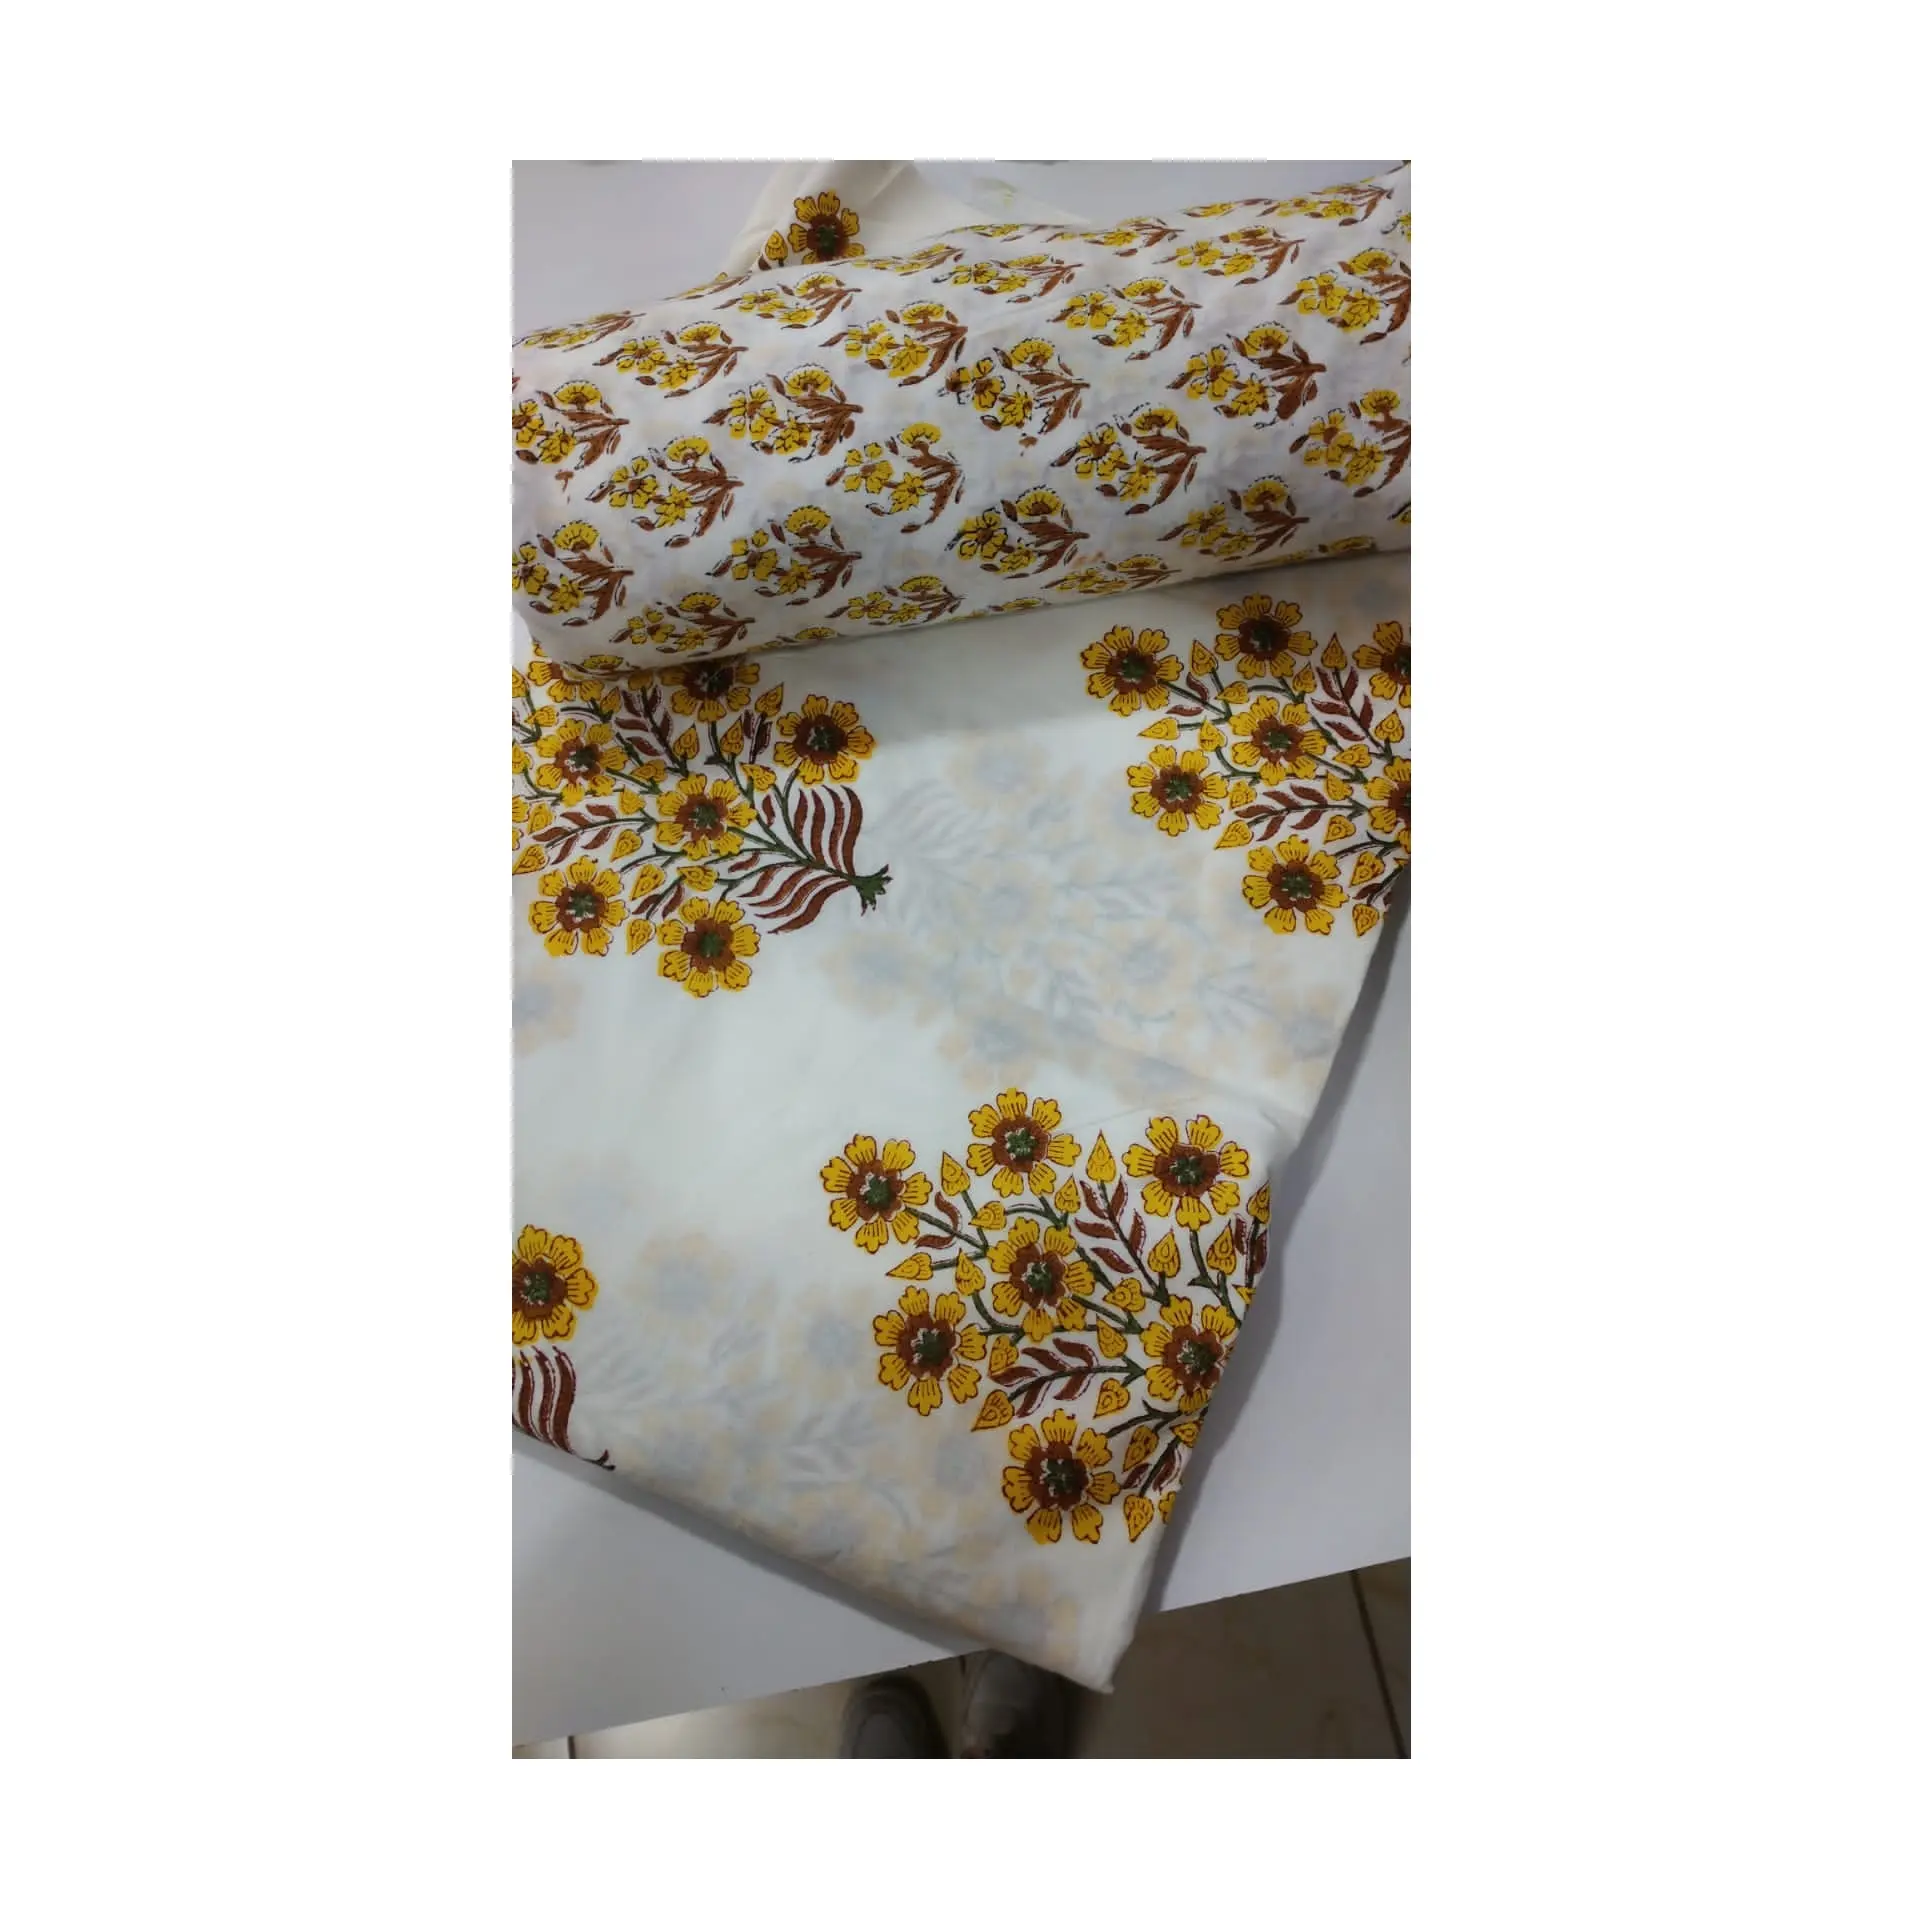 High Quality Material Printed Cotton Fabric for Bed Sheets Pillowcases and Duvet Covers Making from India Export